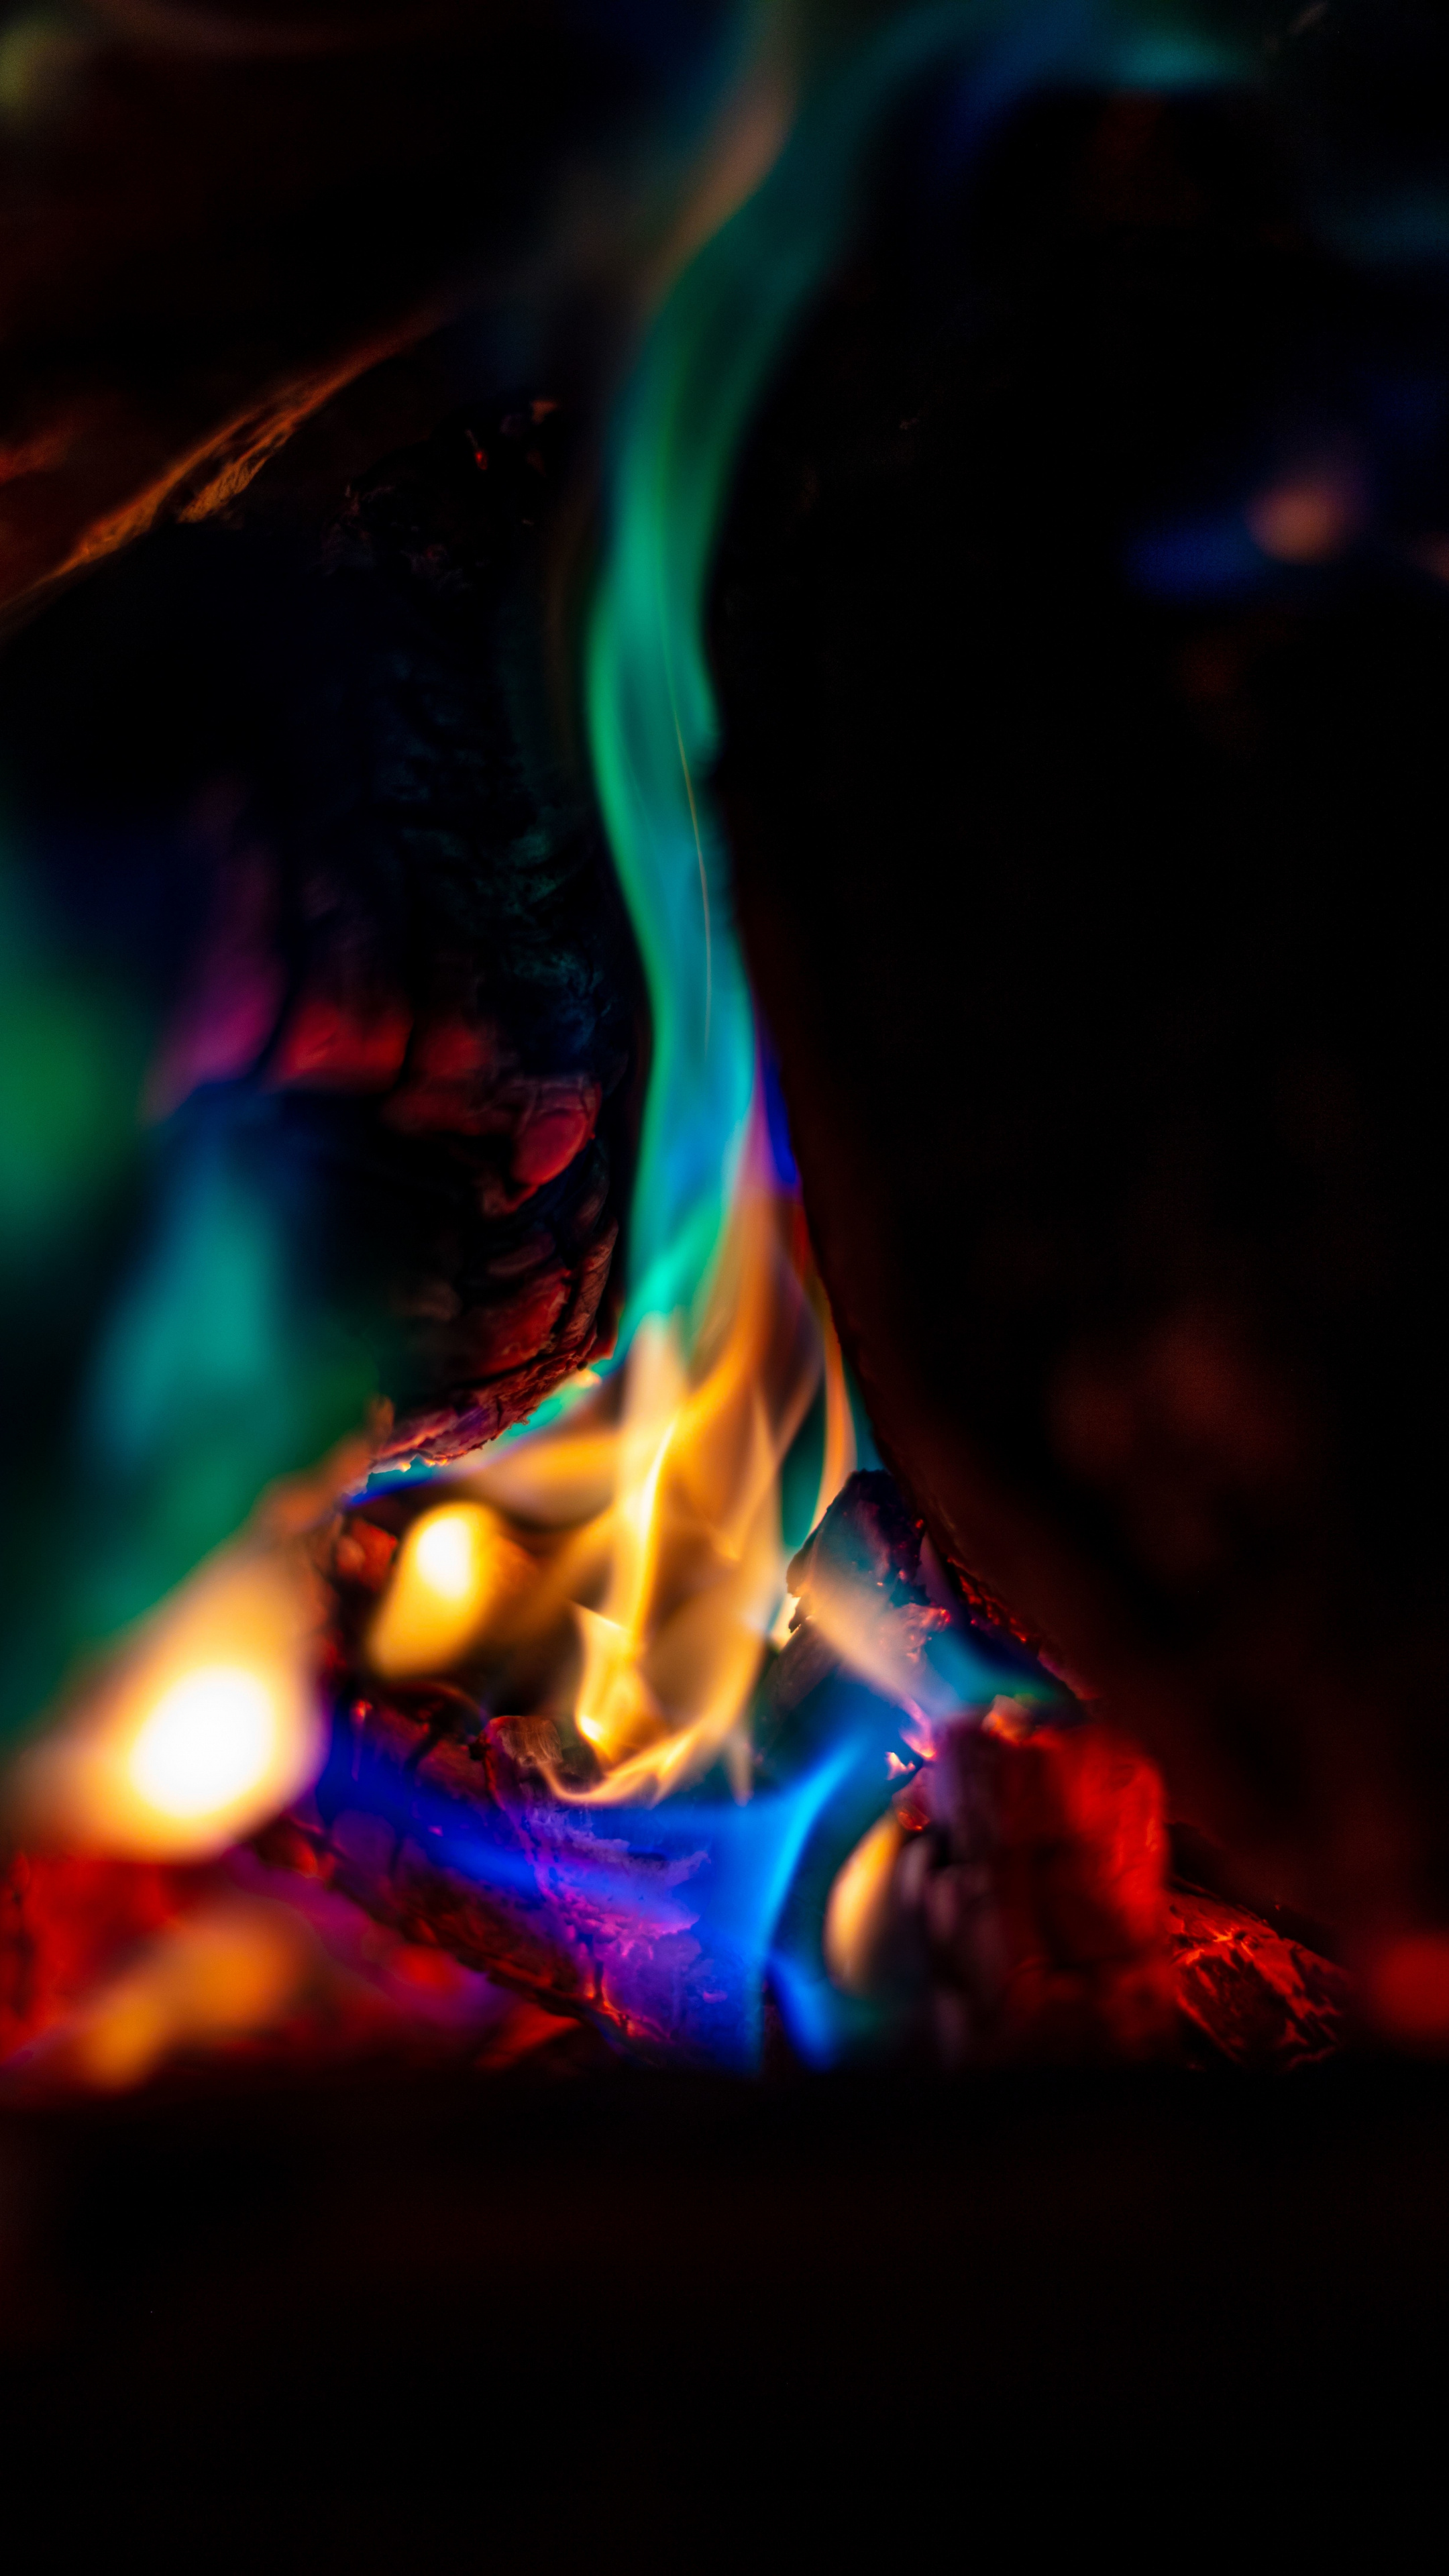 Colorful flame fire wallpapers, Sony Xperia Z5 Premium HD wallpapers, Vivid flame visuals, Flame images, Fire wallpaper backgrounds, 2160x3840 4K Phone